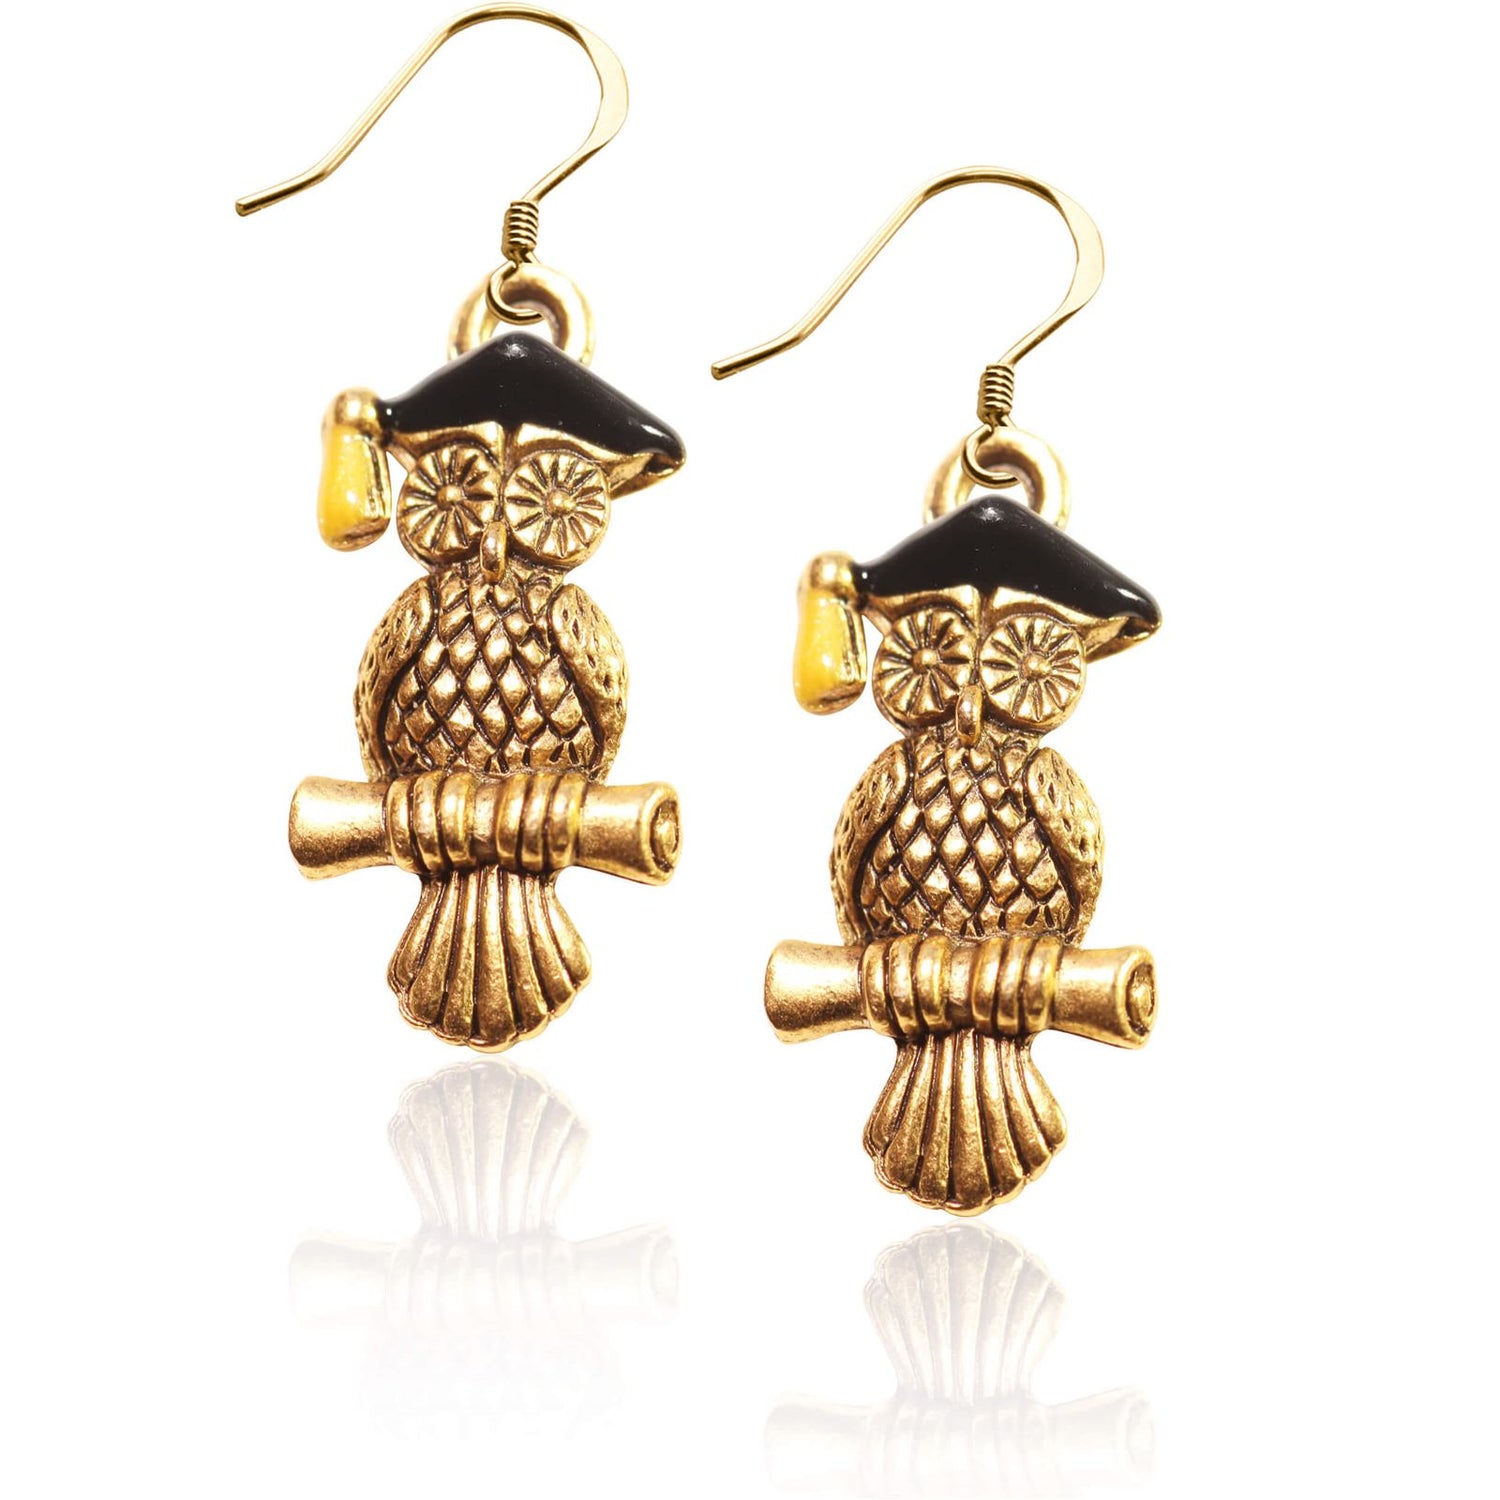 Whimsical Gifts | Owl Charm Earrings in Gold Finish | Professions Themed | Teacher | Jewelry